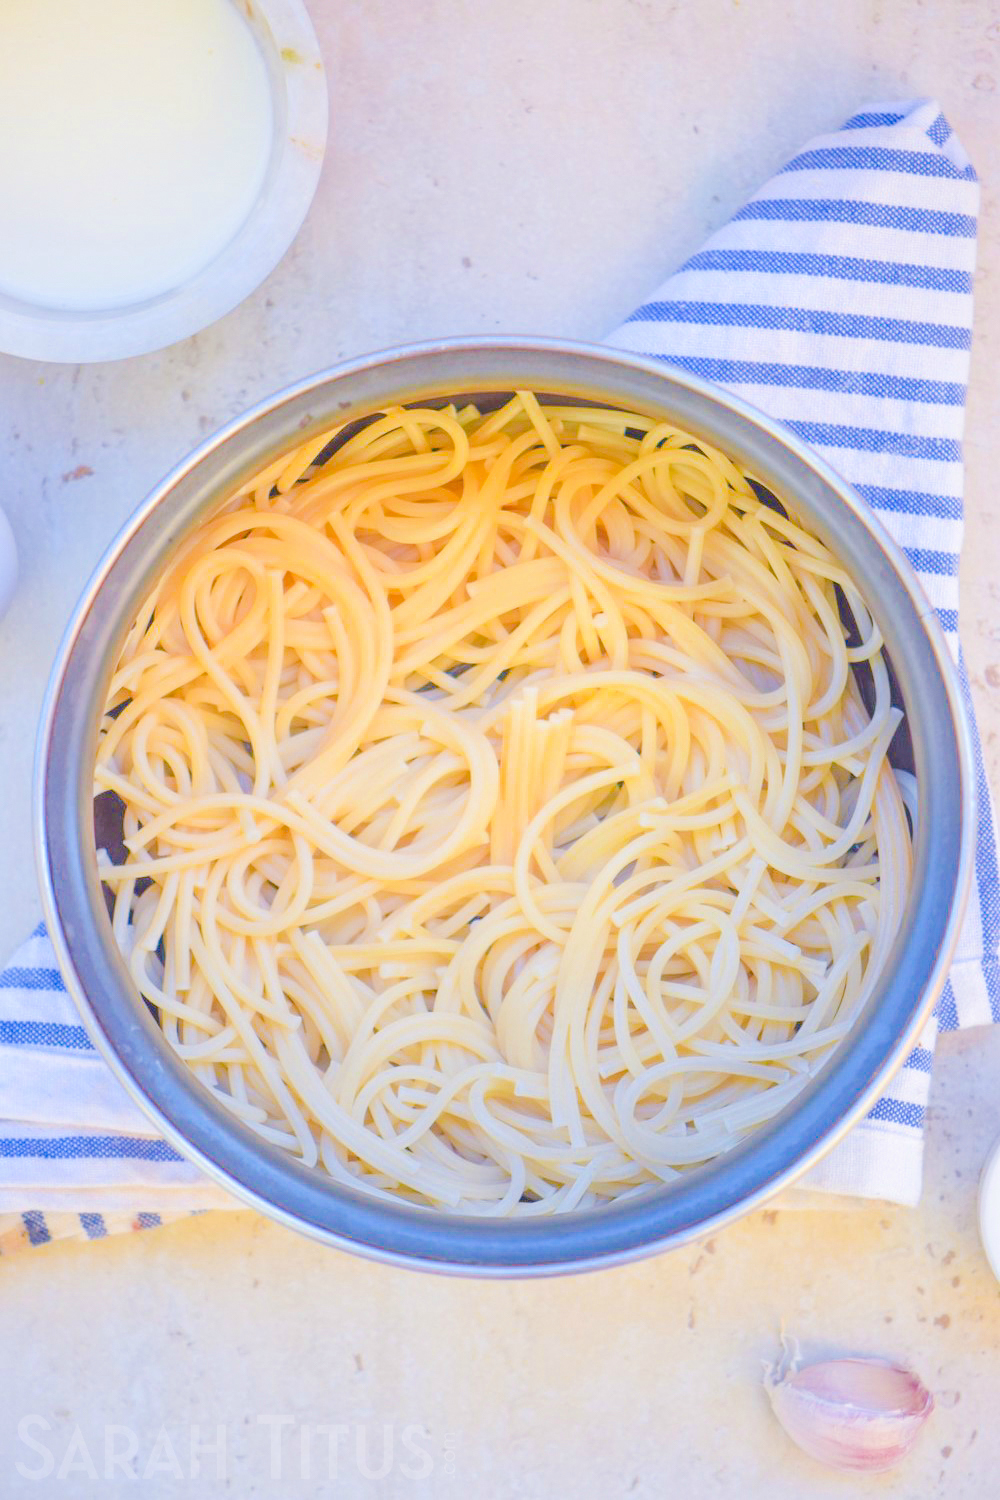 When life gets hectic during the week, this is your saving grace! This One Pot Creamy Pepper Pasta is delicious, easy to make, and a huge hit with family!